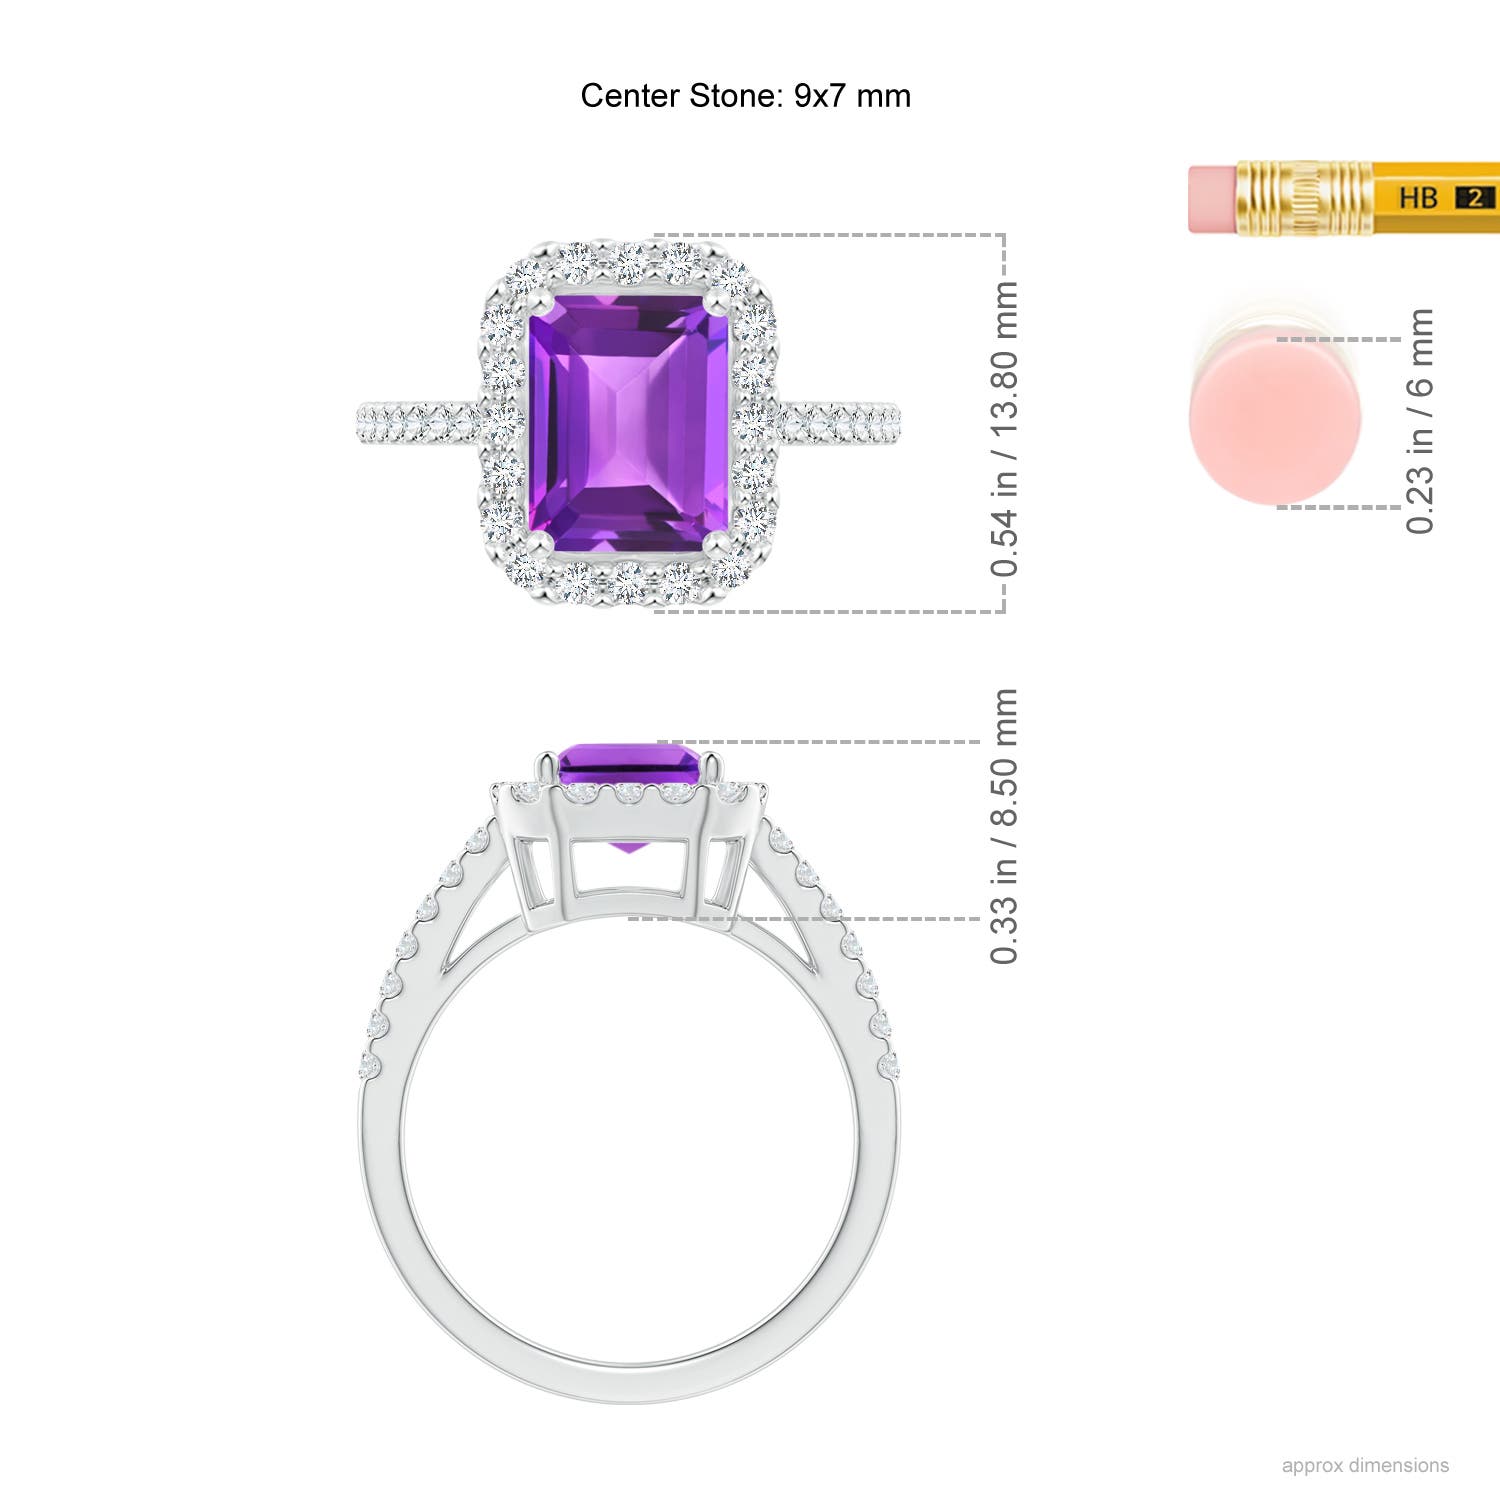 AAA - Amethyst / 2.68 CT / 14 KT White Gold